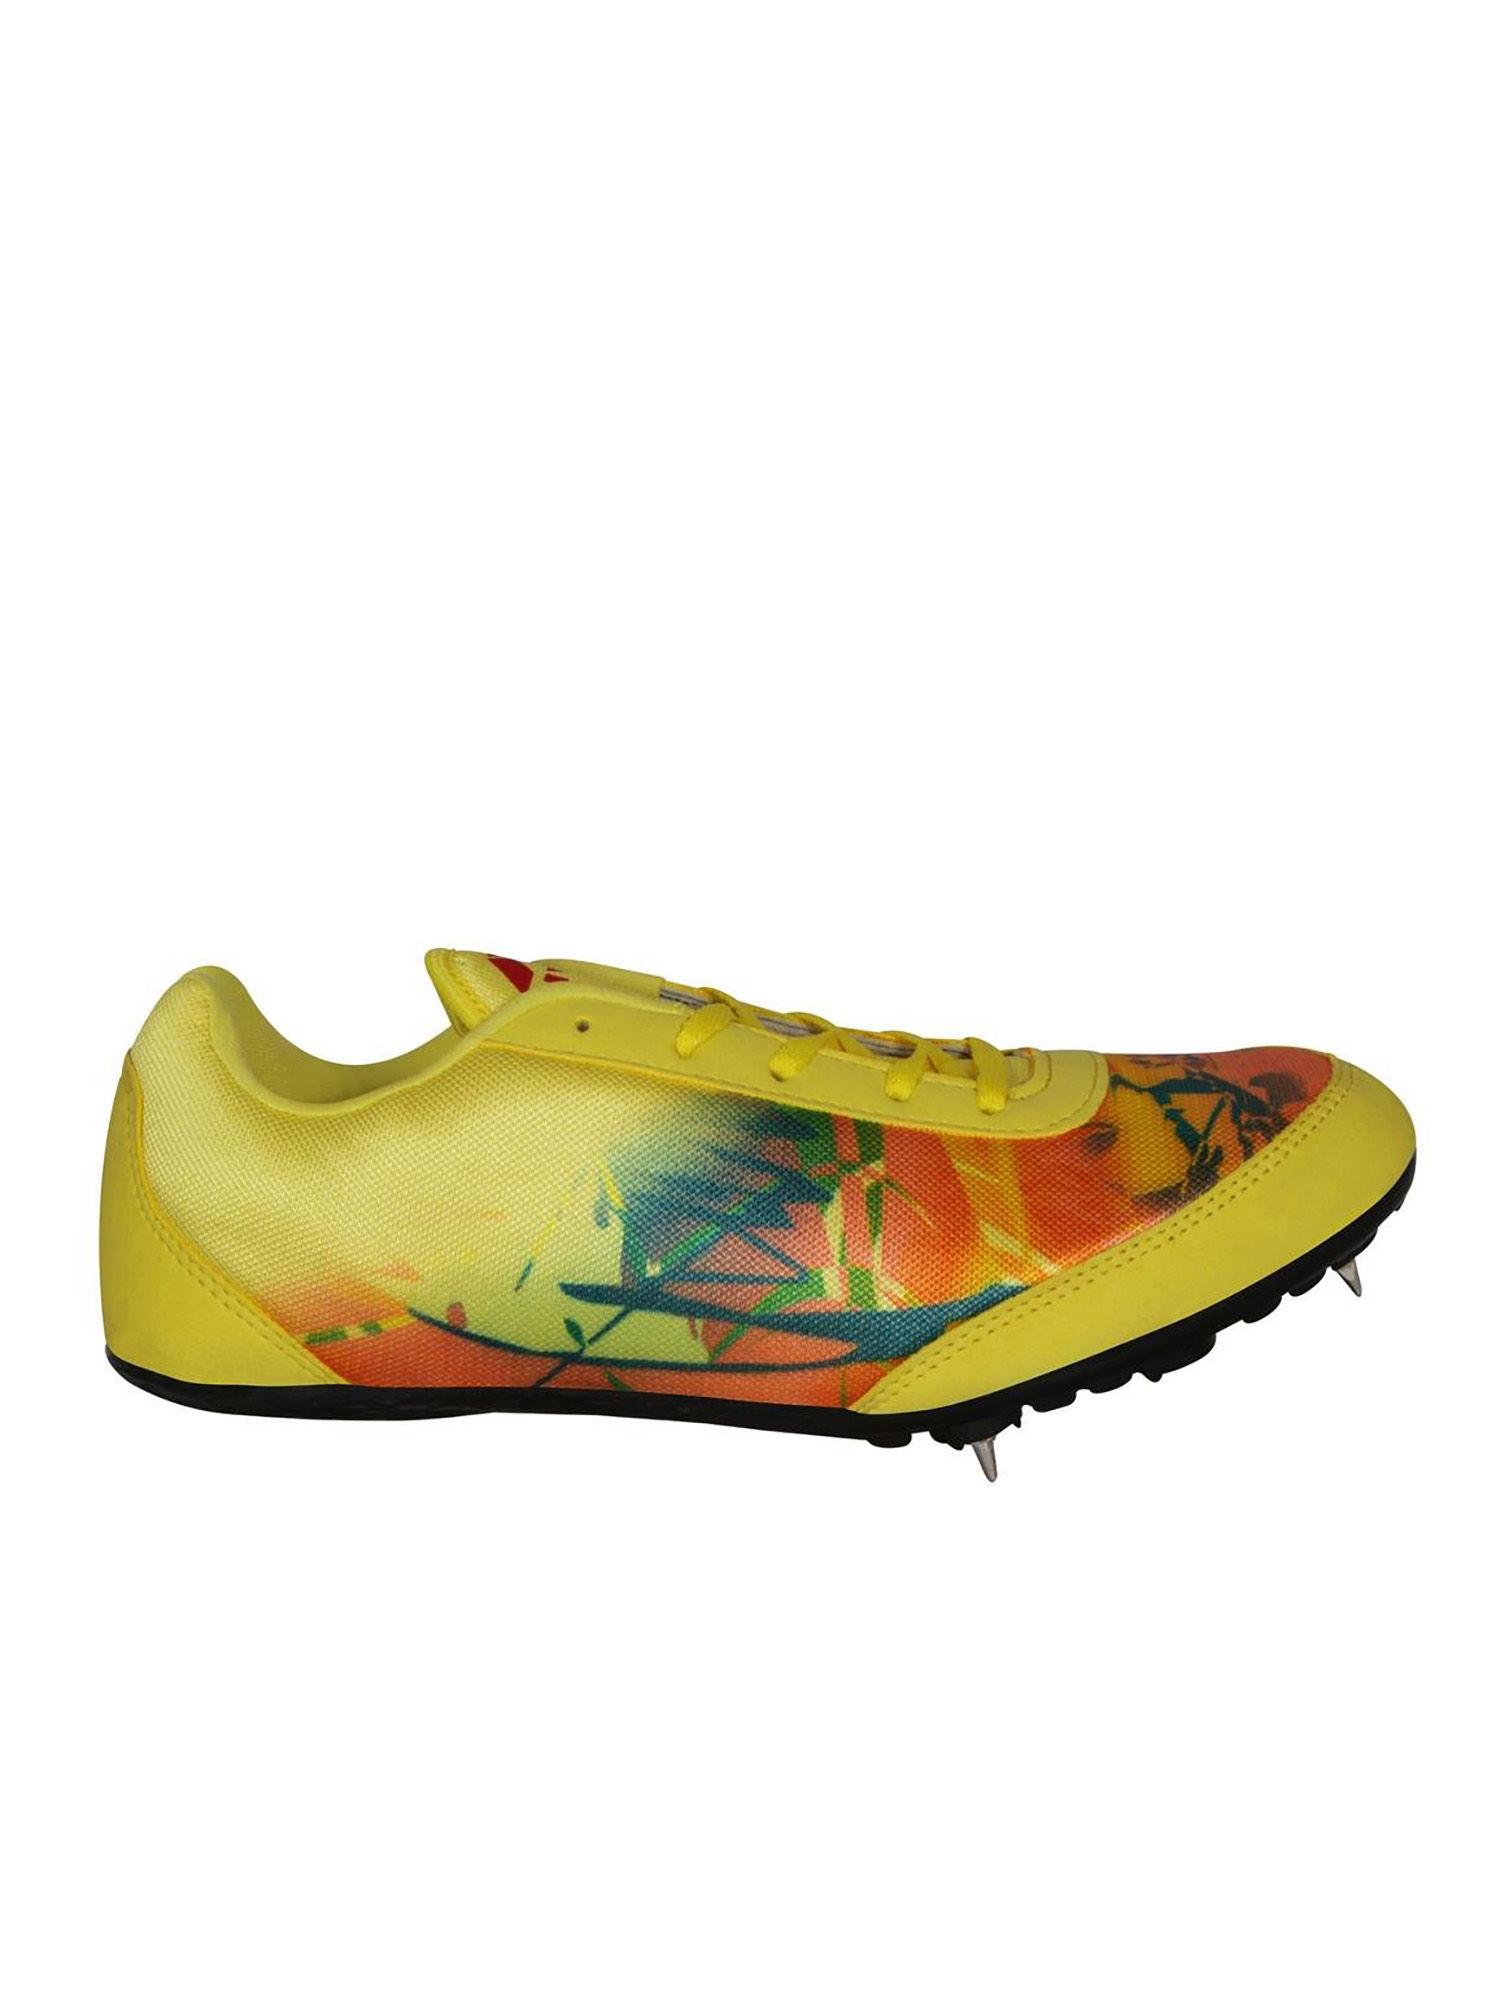 yellow zion-1 sports shoes for men